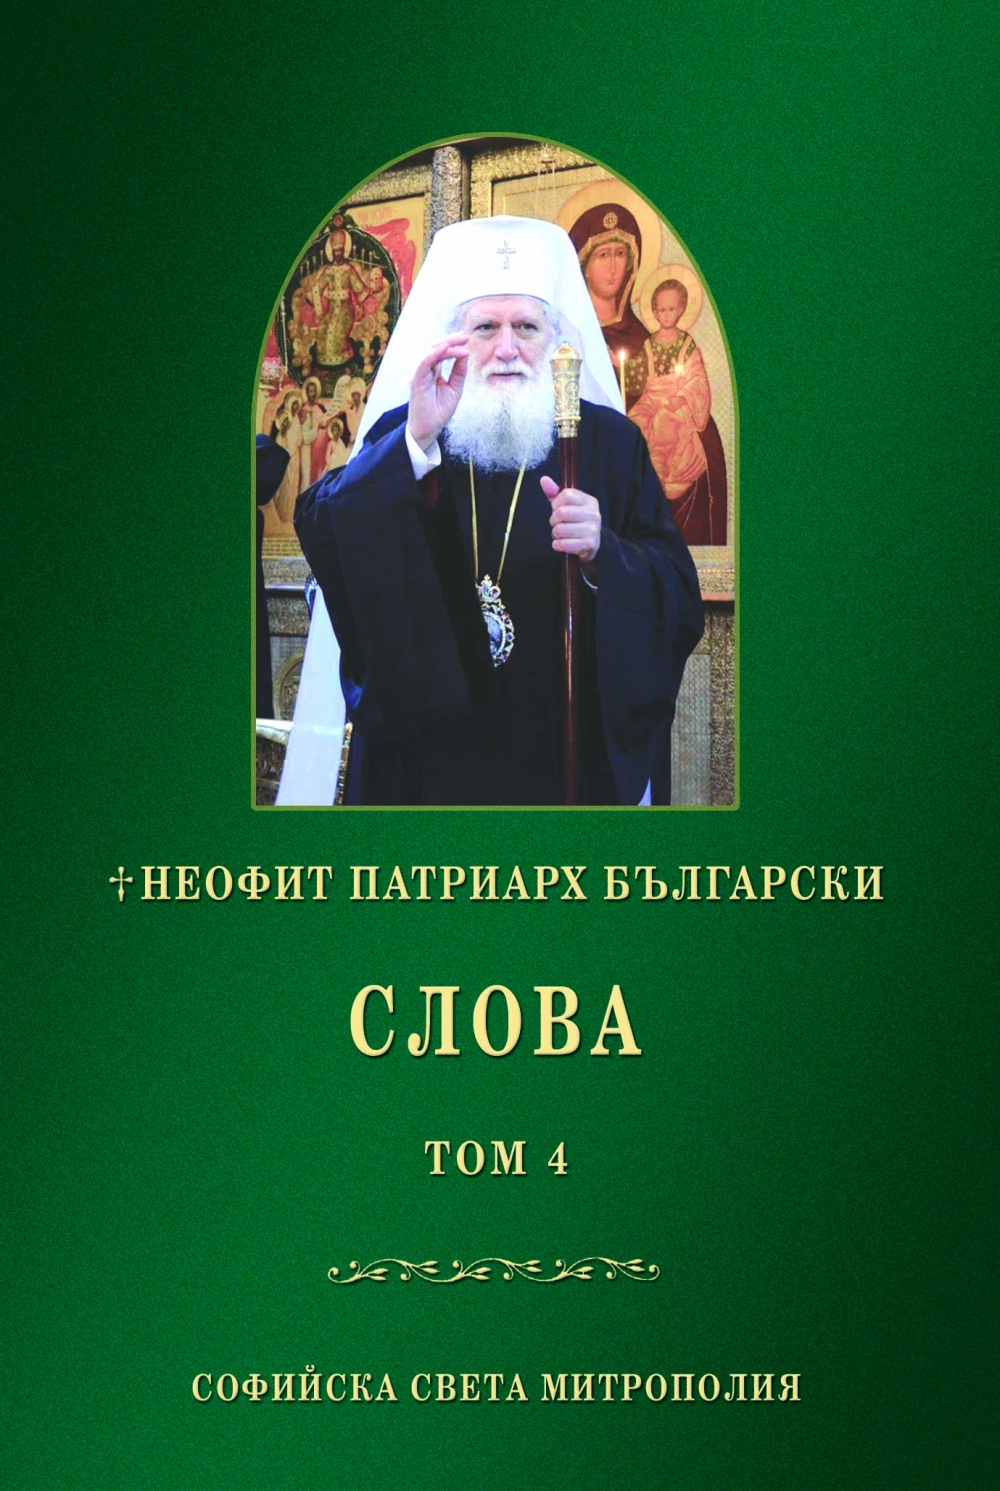 The Fourth Volume of the Book “Words of Patriarch Neophyte of Bulgaria” Published